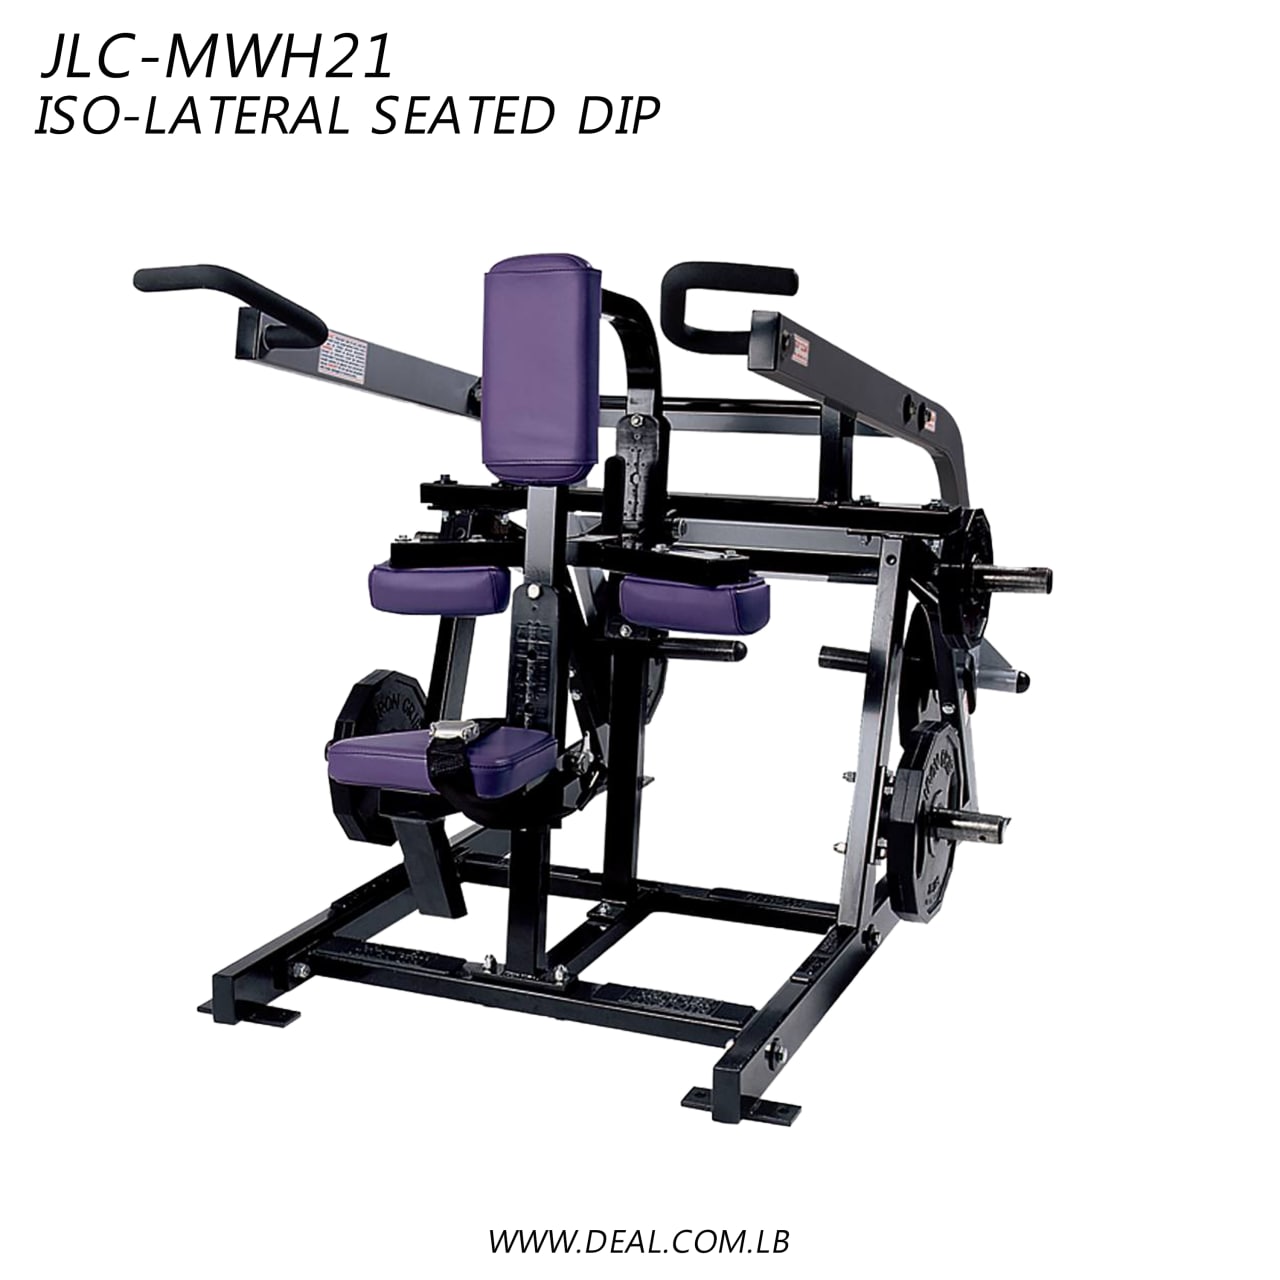 JLC-MWH21 | ISO-Lateral seated dip